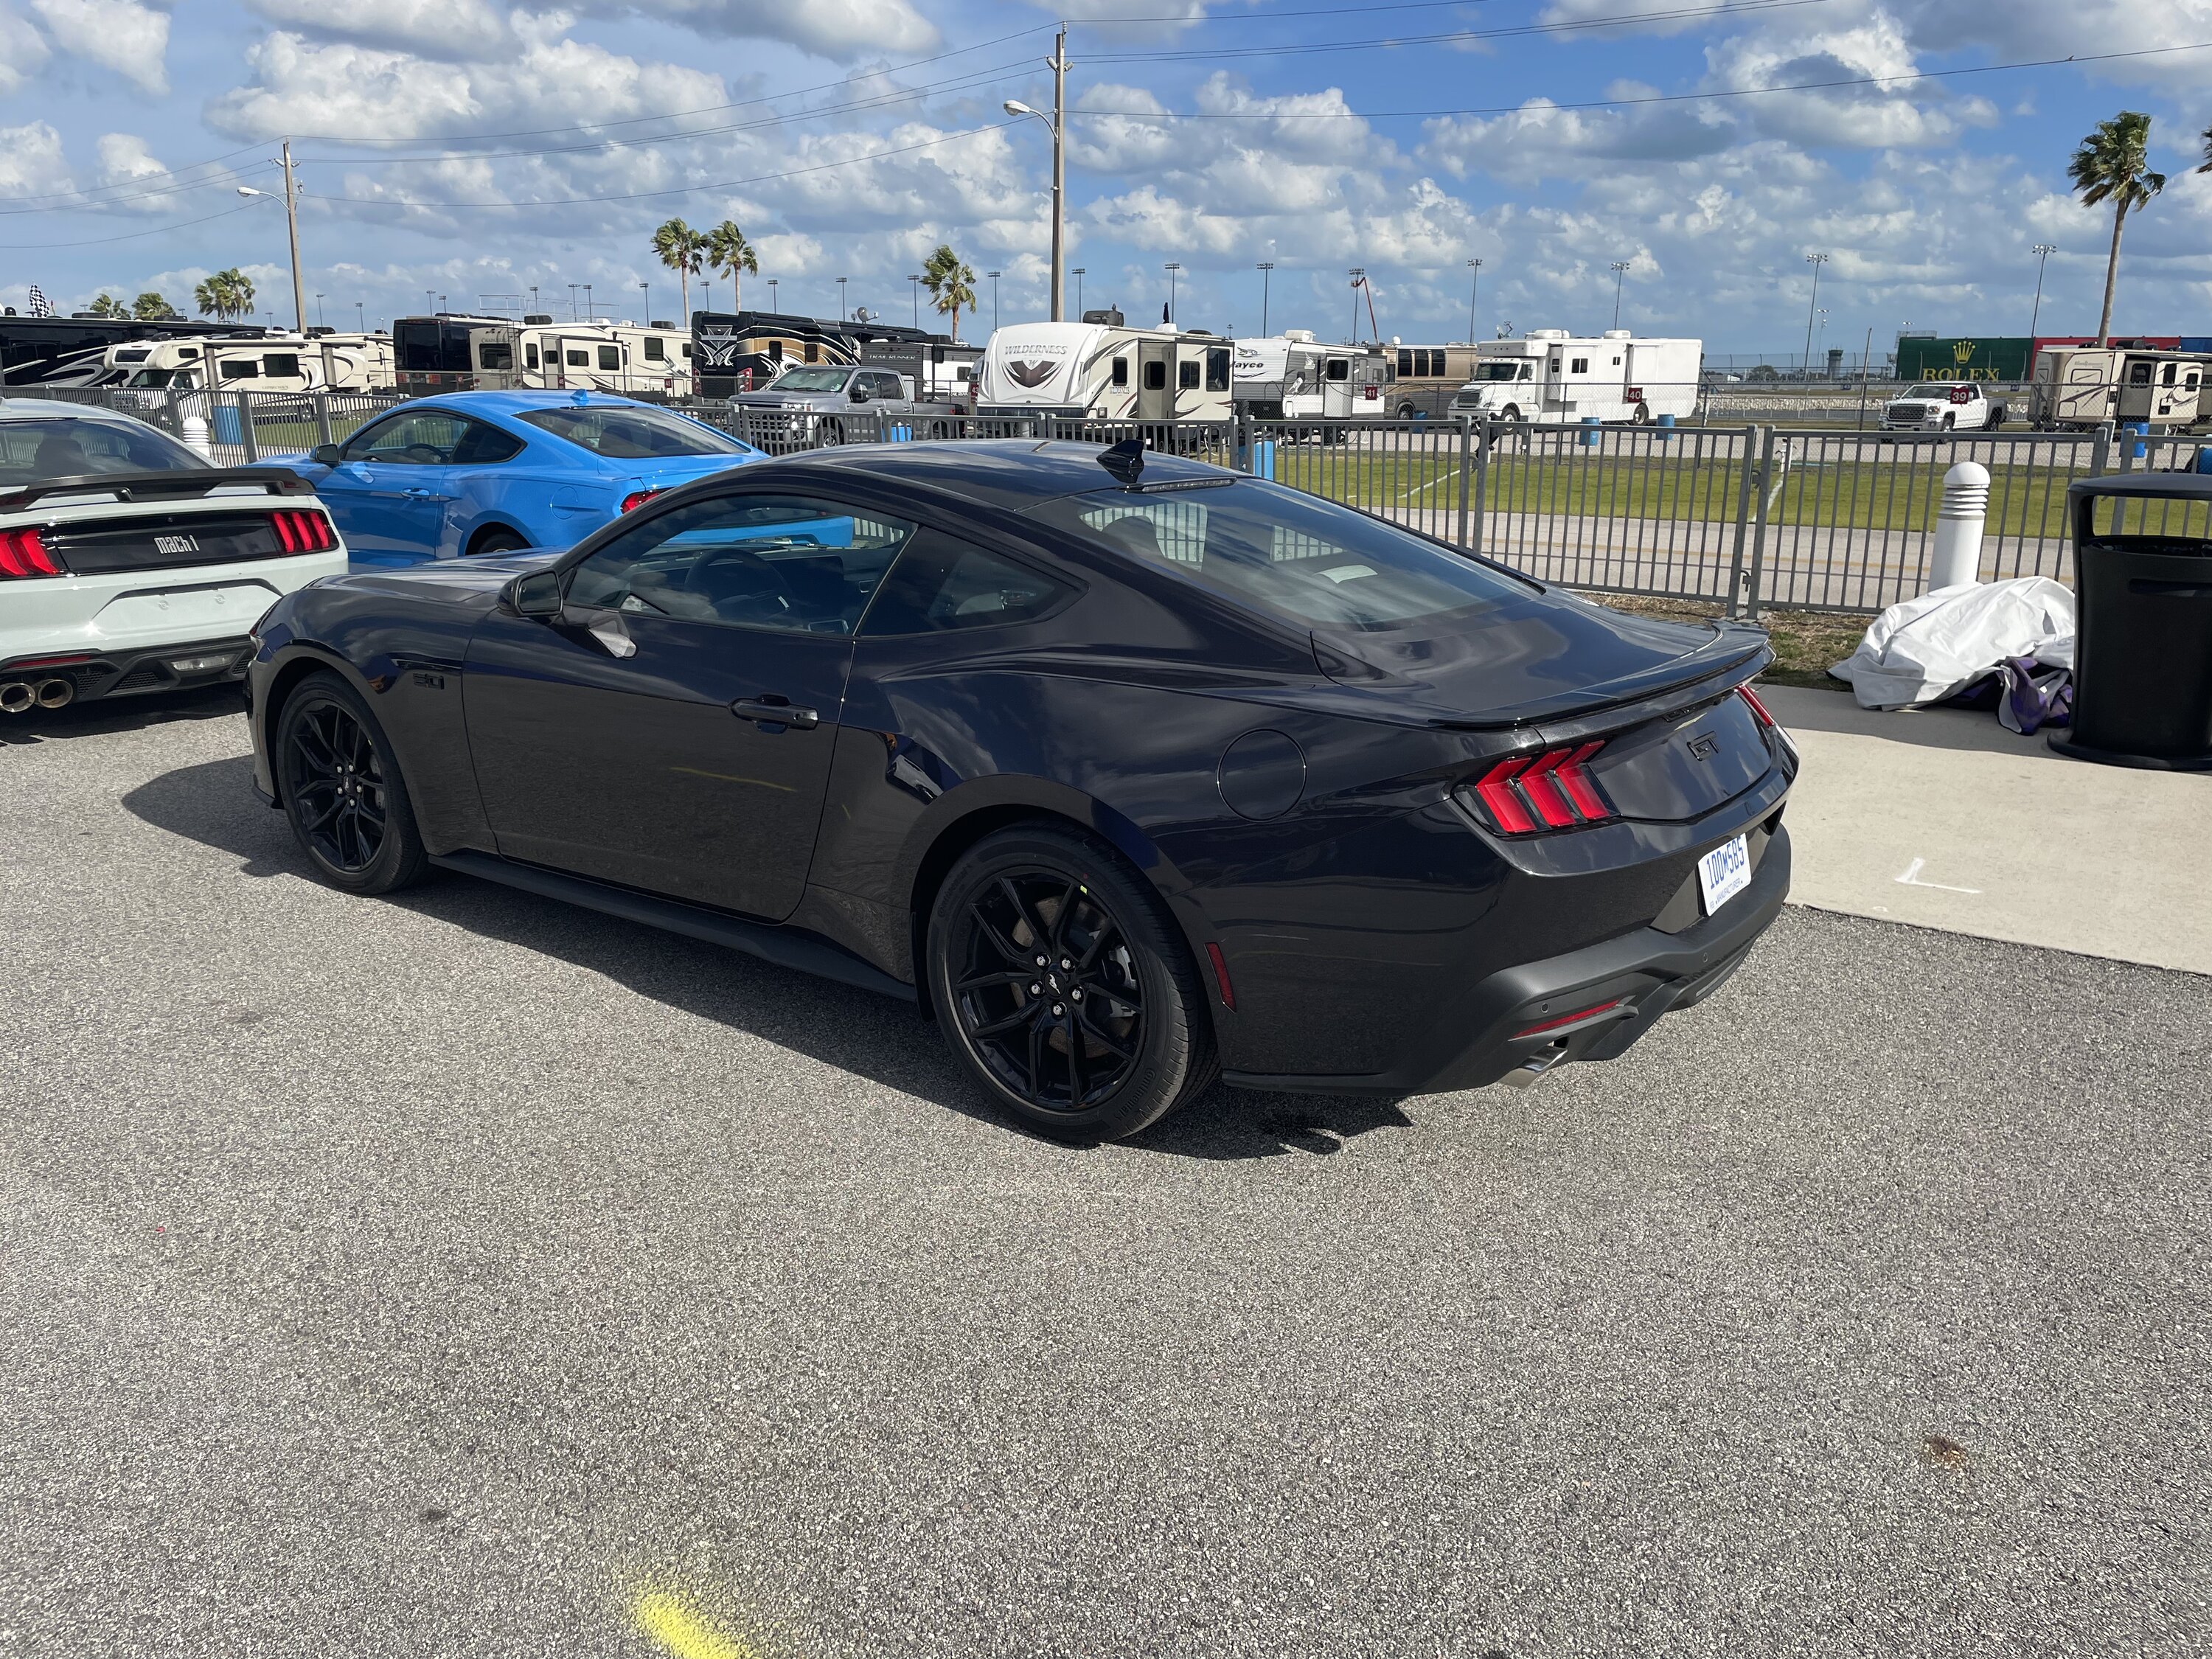 S650 Mustang 2024 Mustang GT on display this weekend at Daytona Rolex 24 Hours Race 07601D72-4BC5-4C4D-9A9A-A9ADB65FFEFC